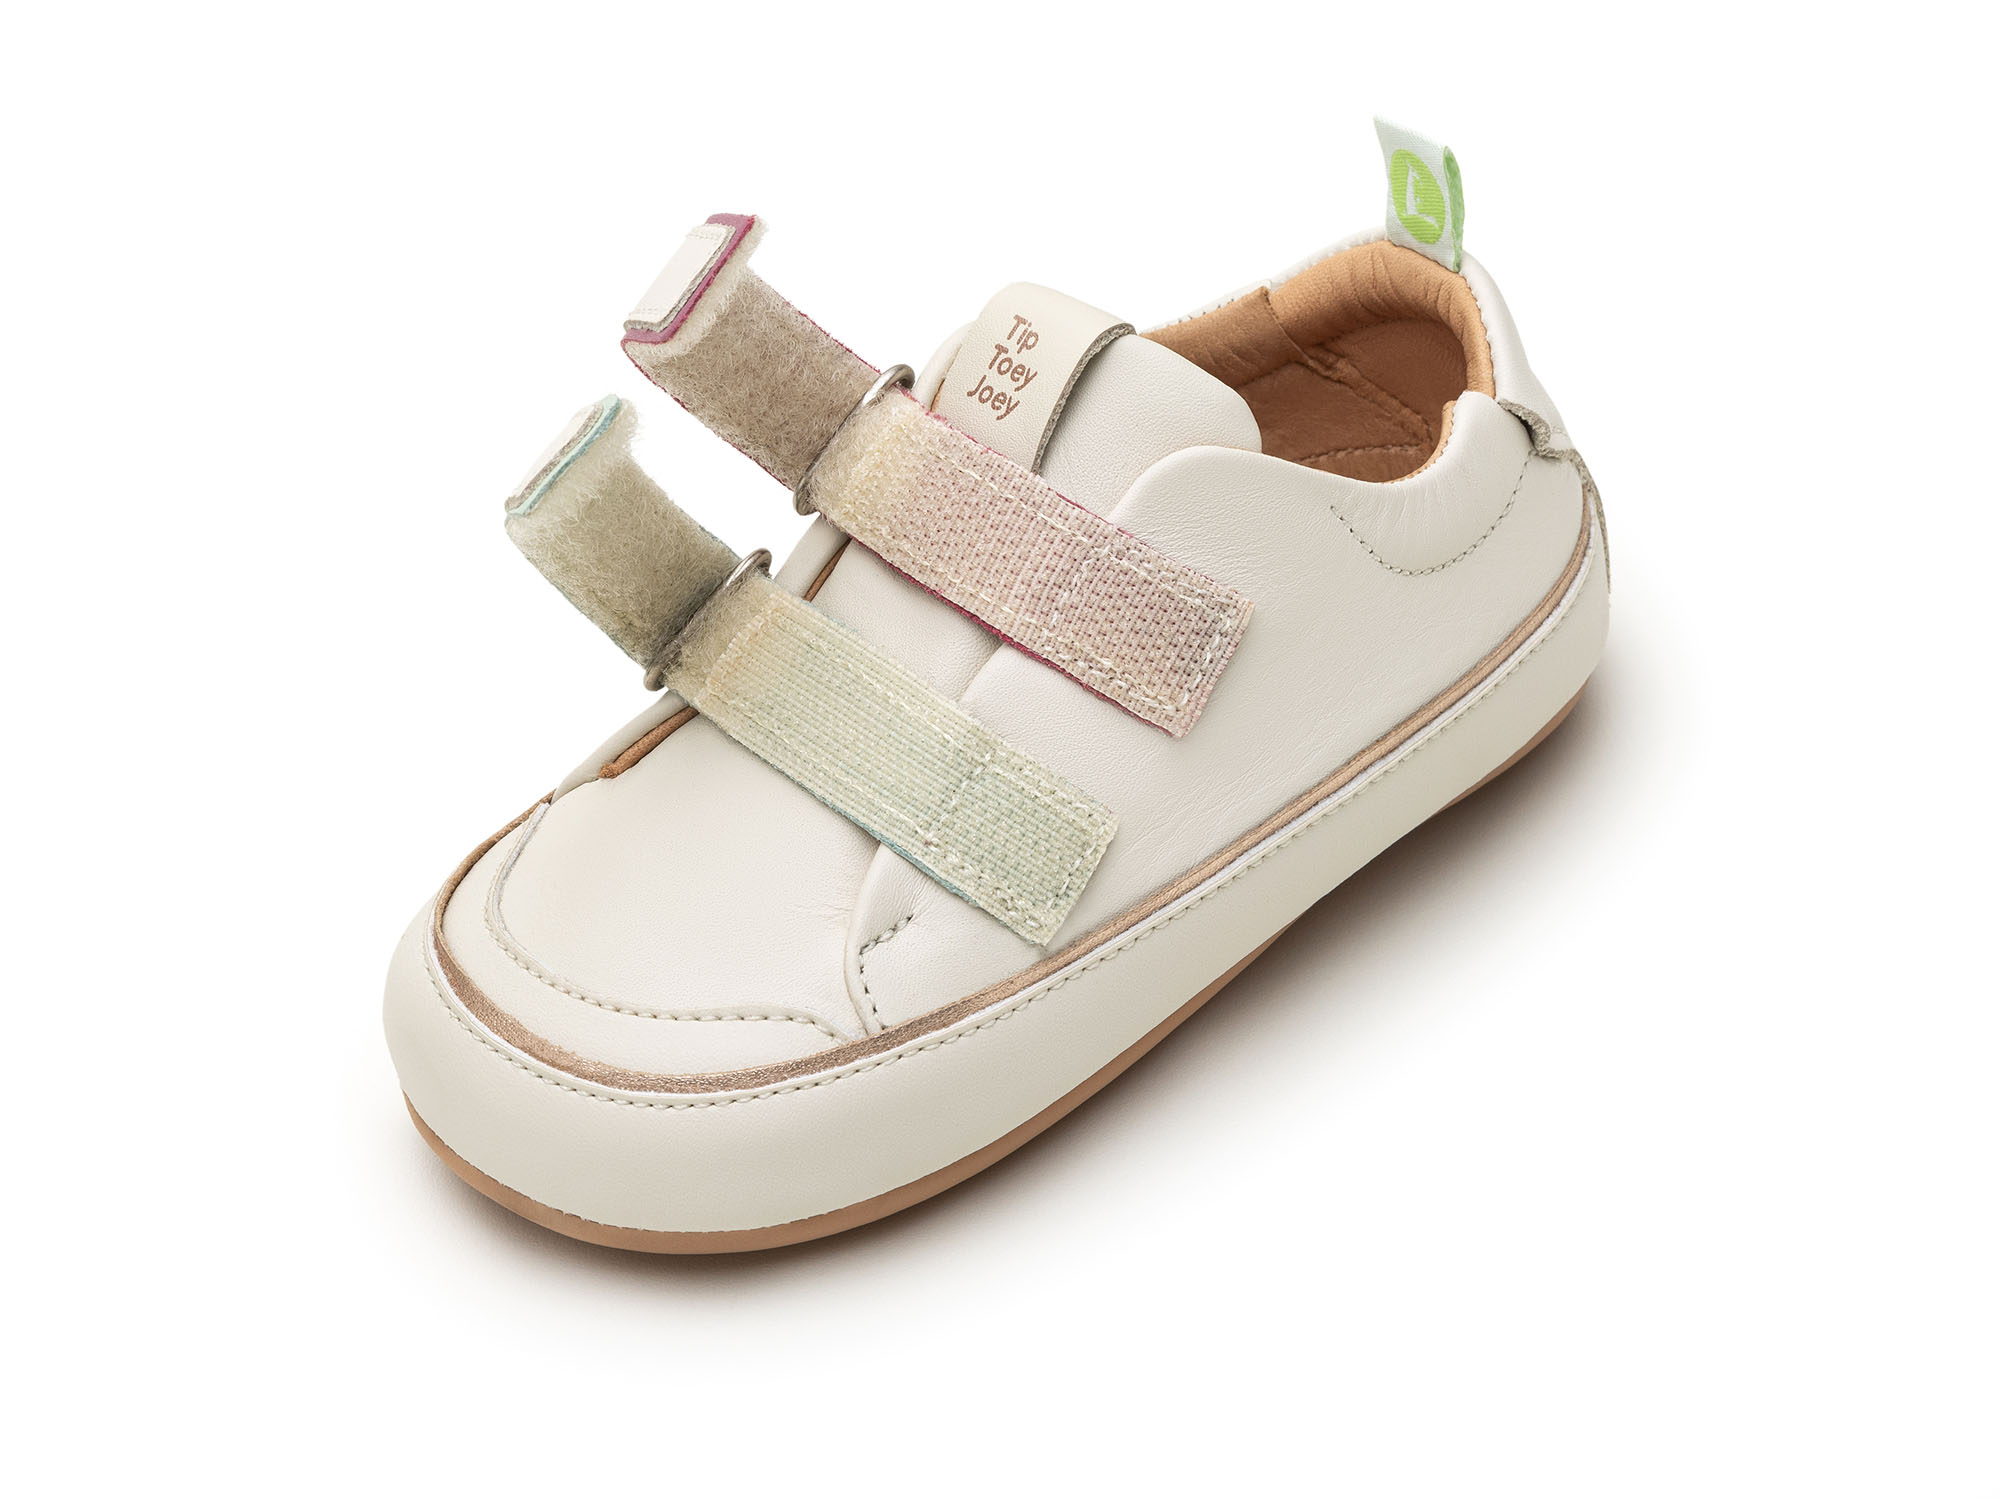 UP & GO Sneakers for Girls Bossy Colors | Tip Toey Joey - Australia - 5